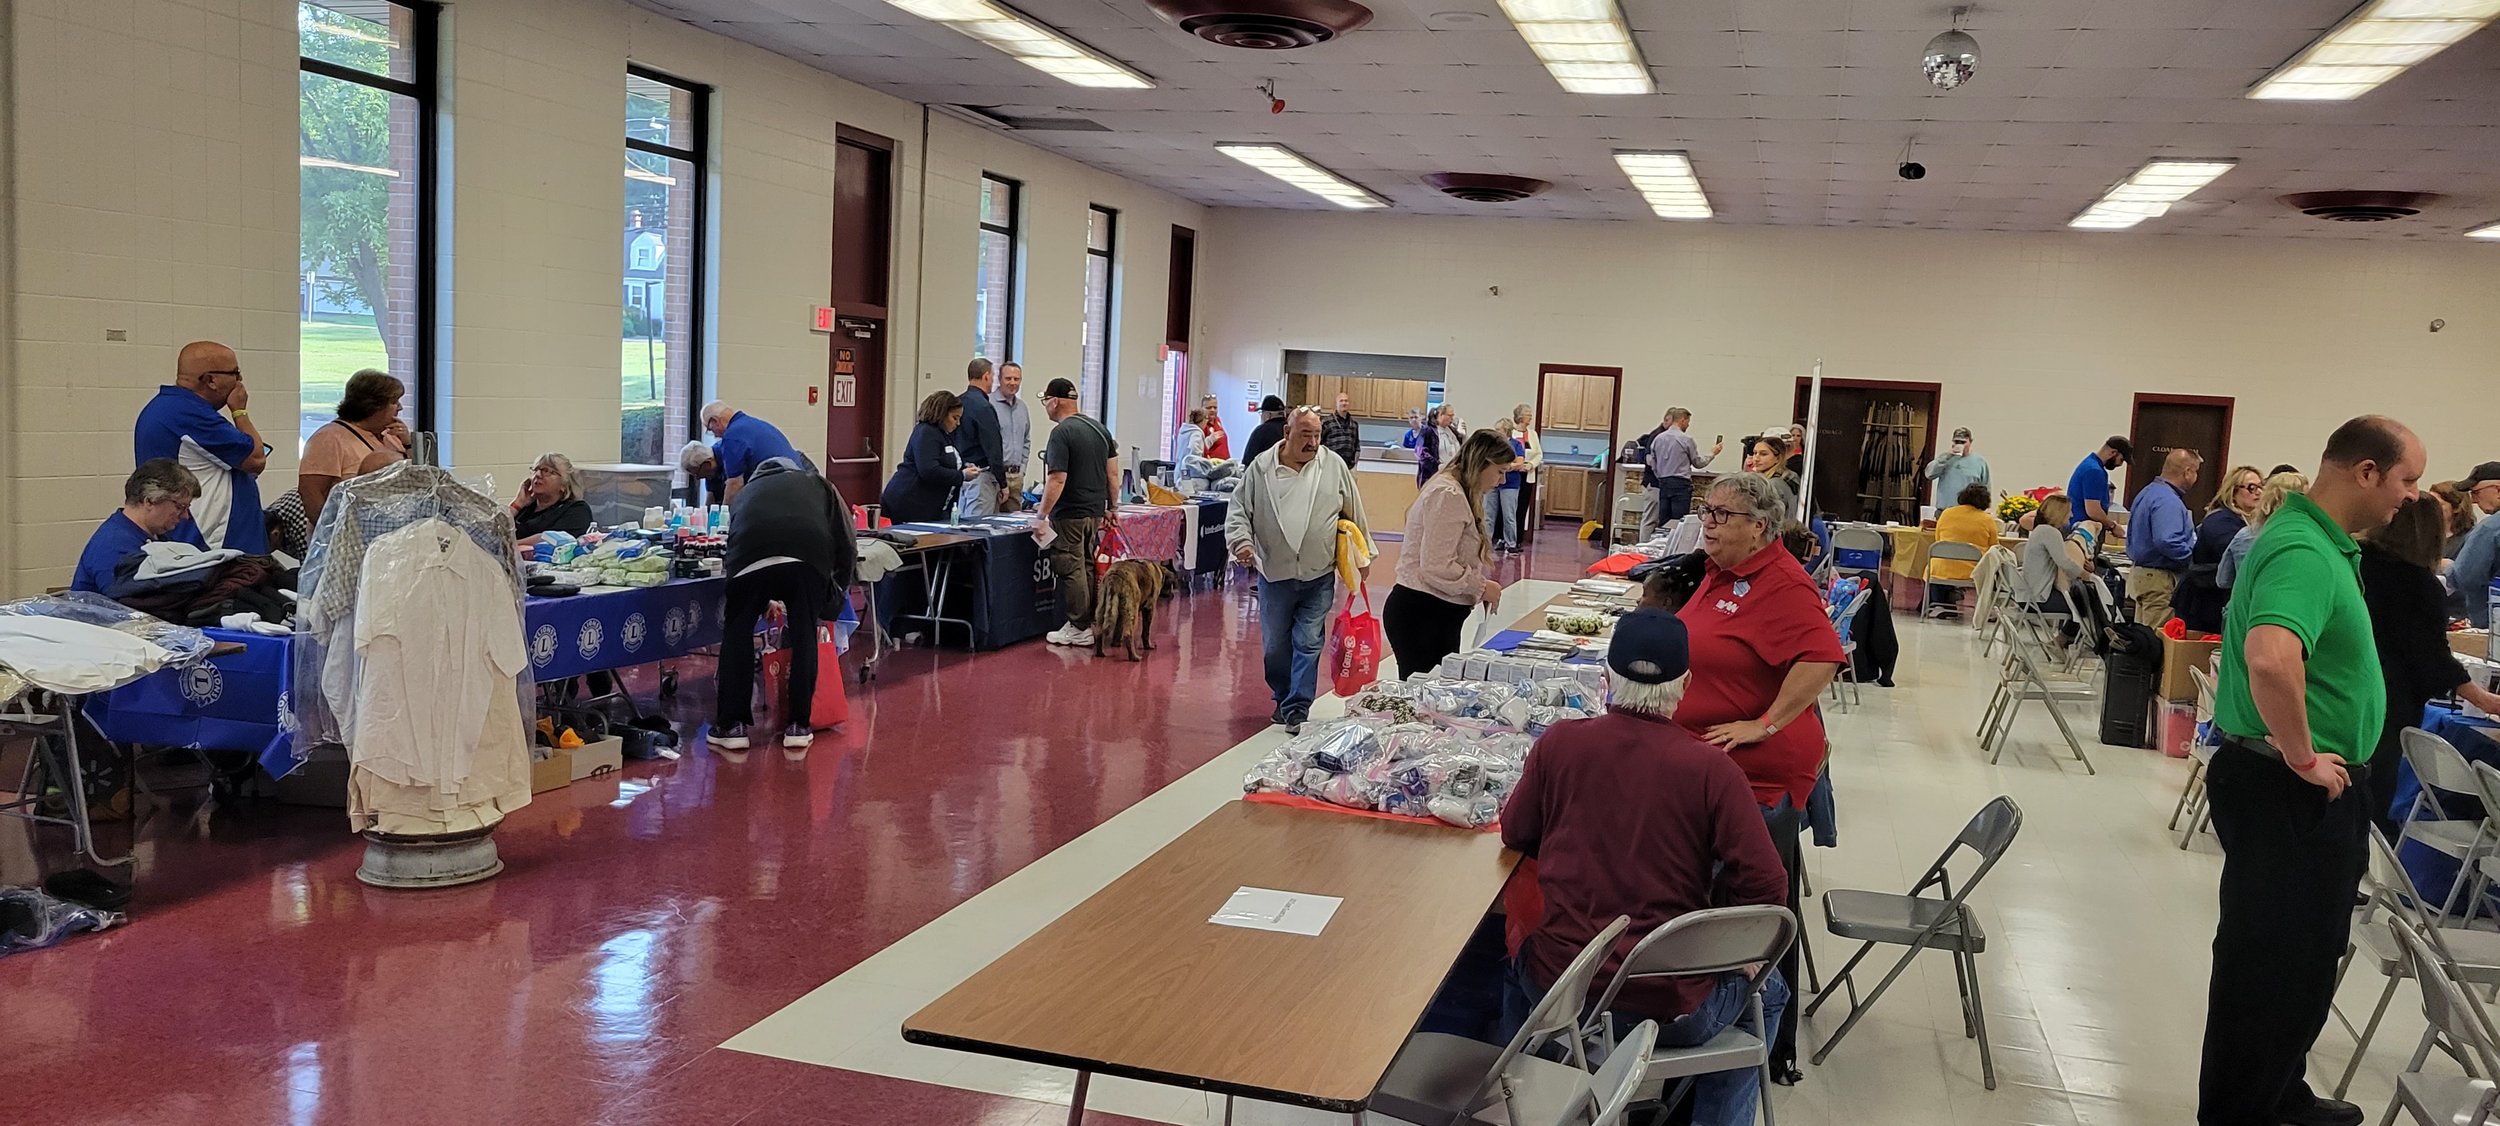   Group of individuals standing and sitting at several rows of vendor tables while talking and checking out program materials, clothing items and household supplies.  